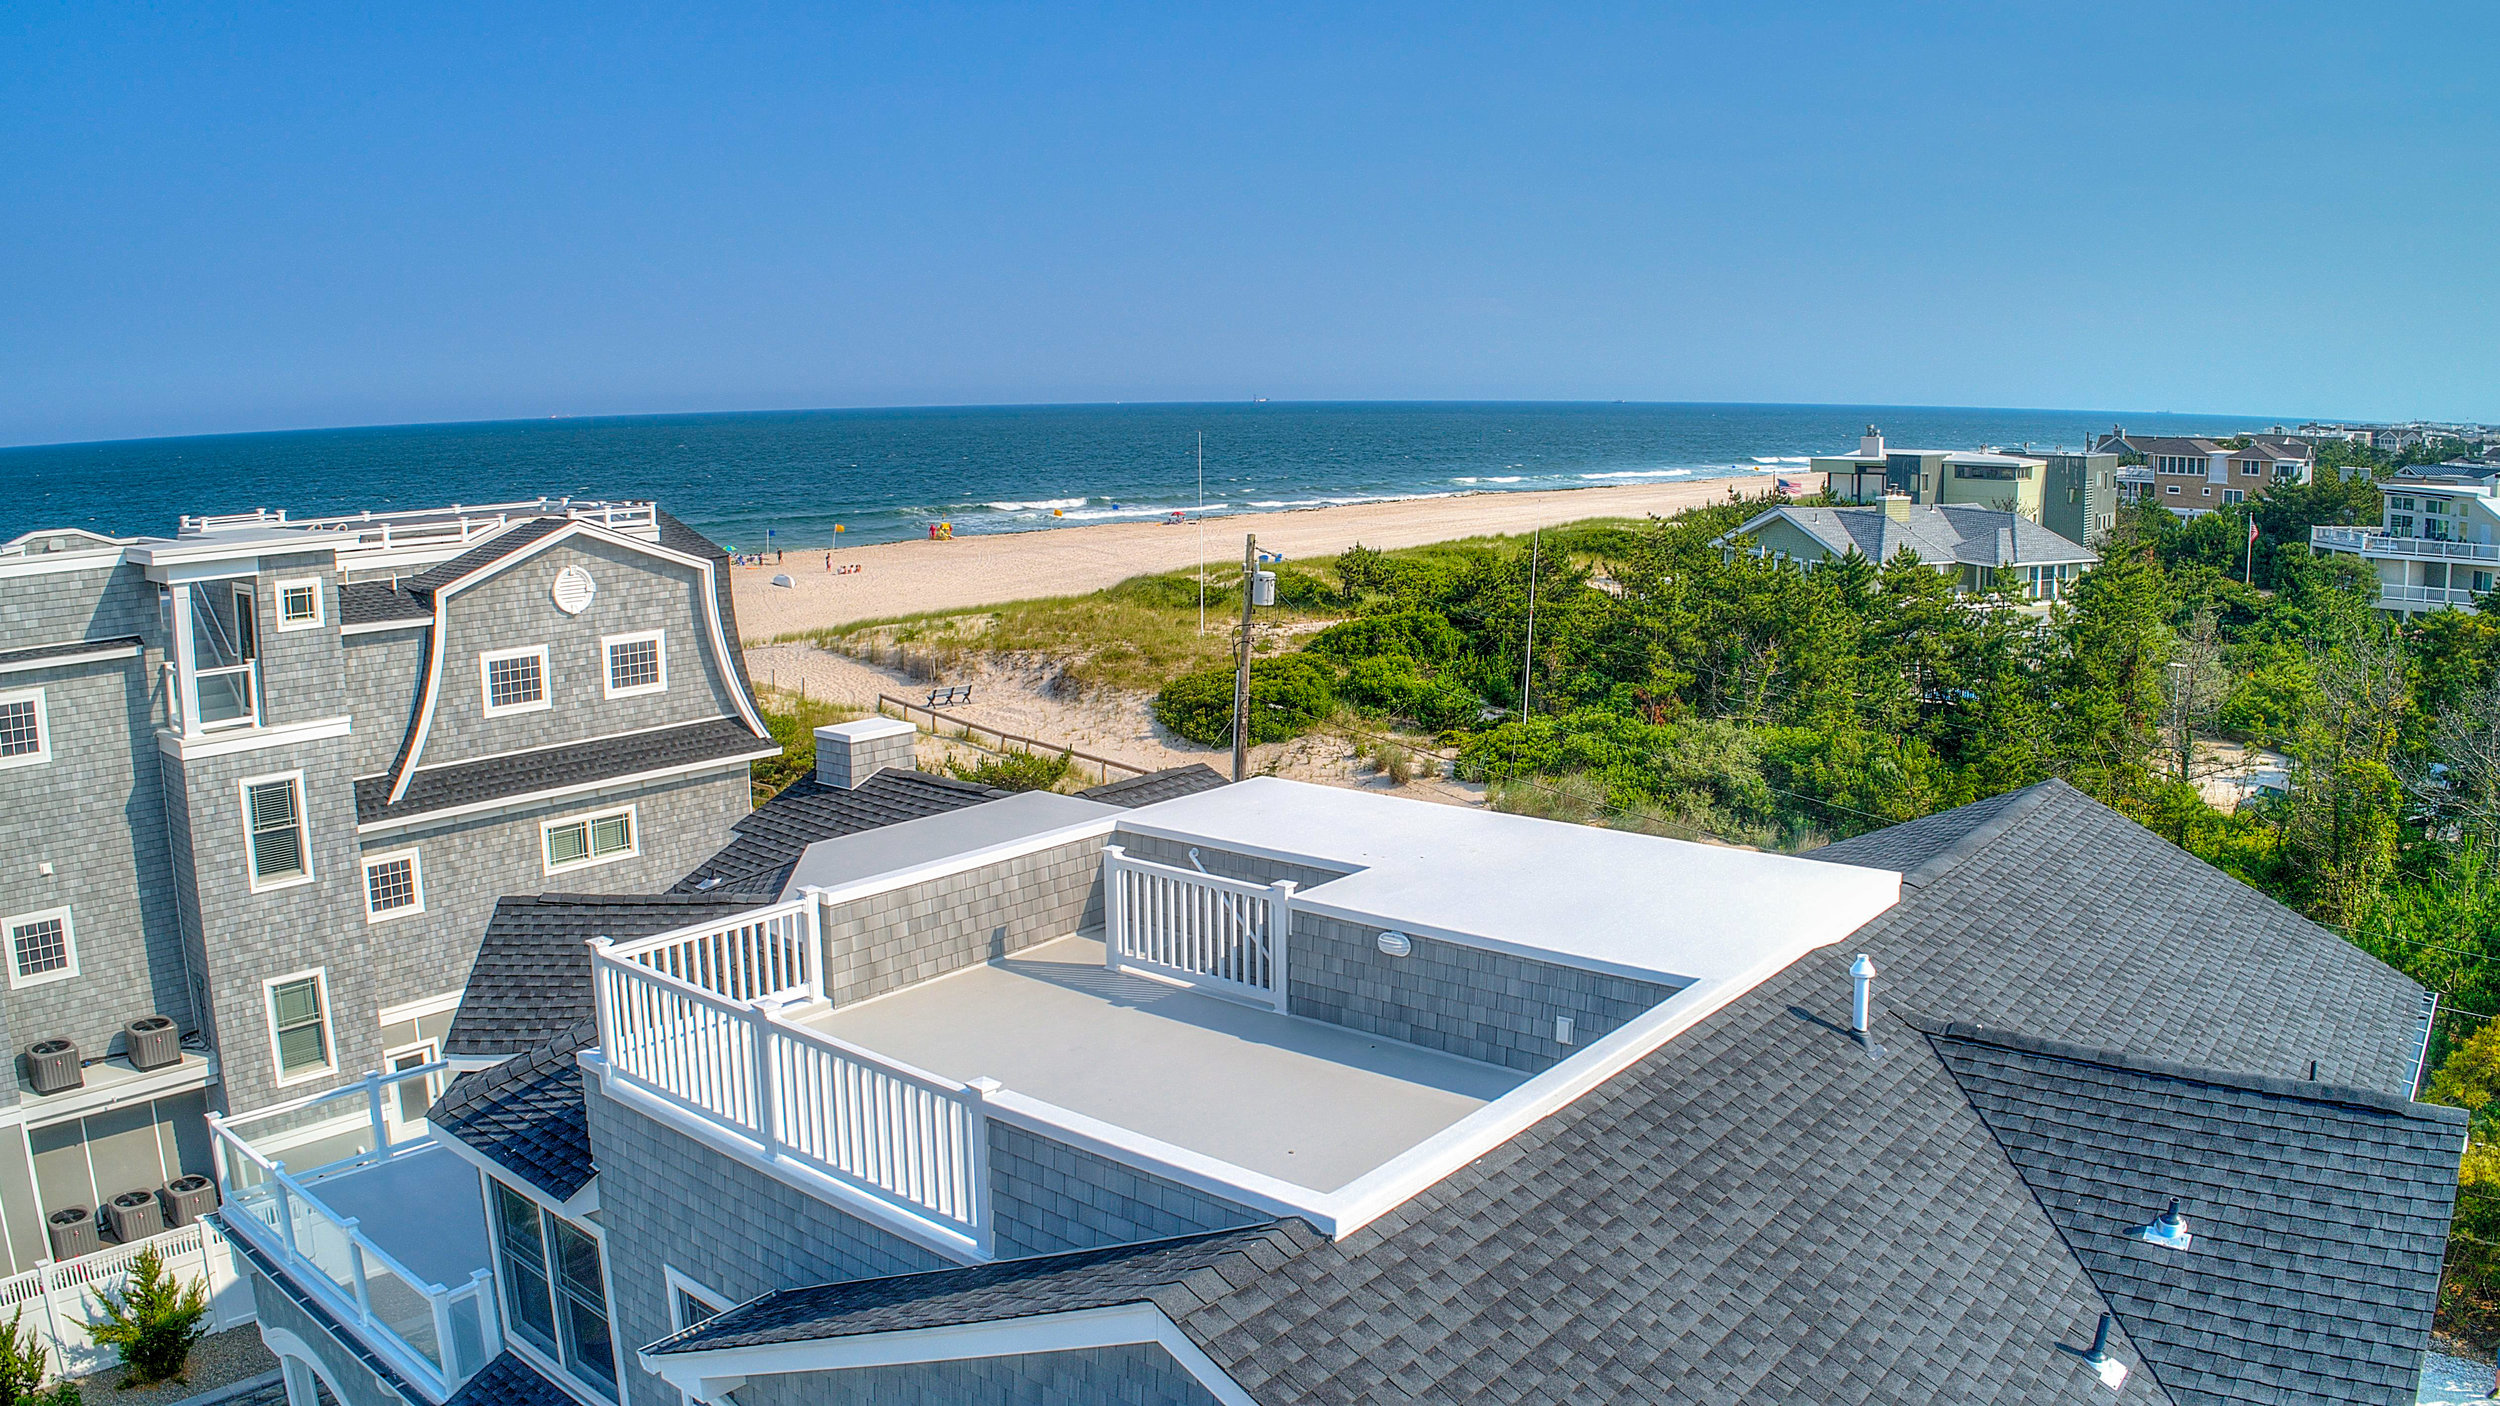 Roof top deck ocean view long beach island new jersey drone aerial photography real estate